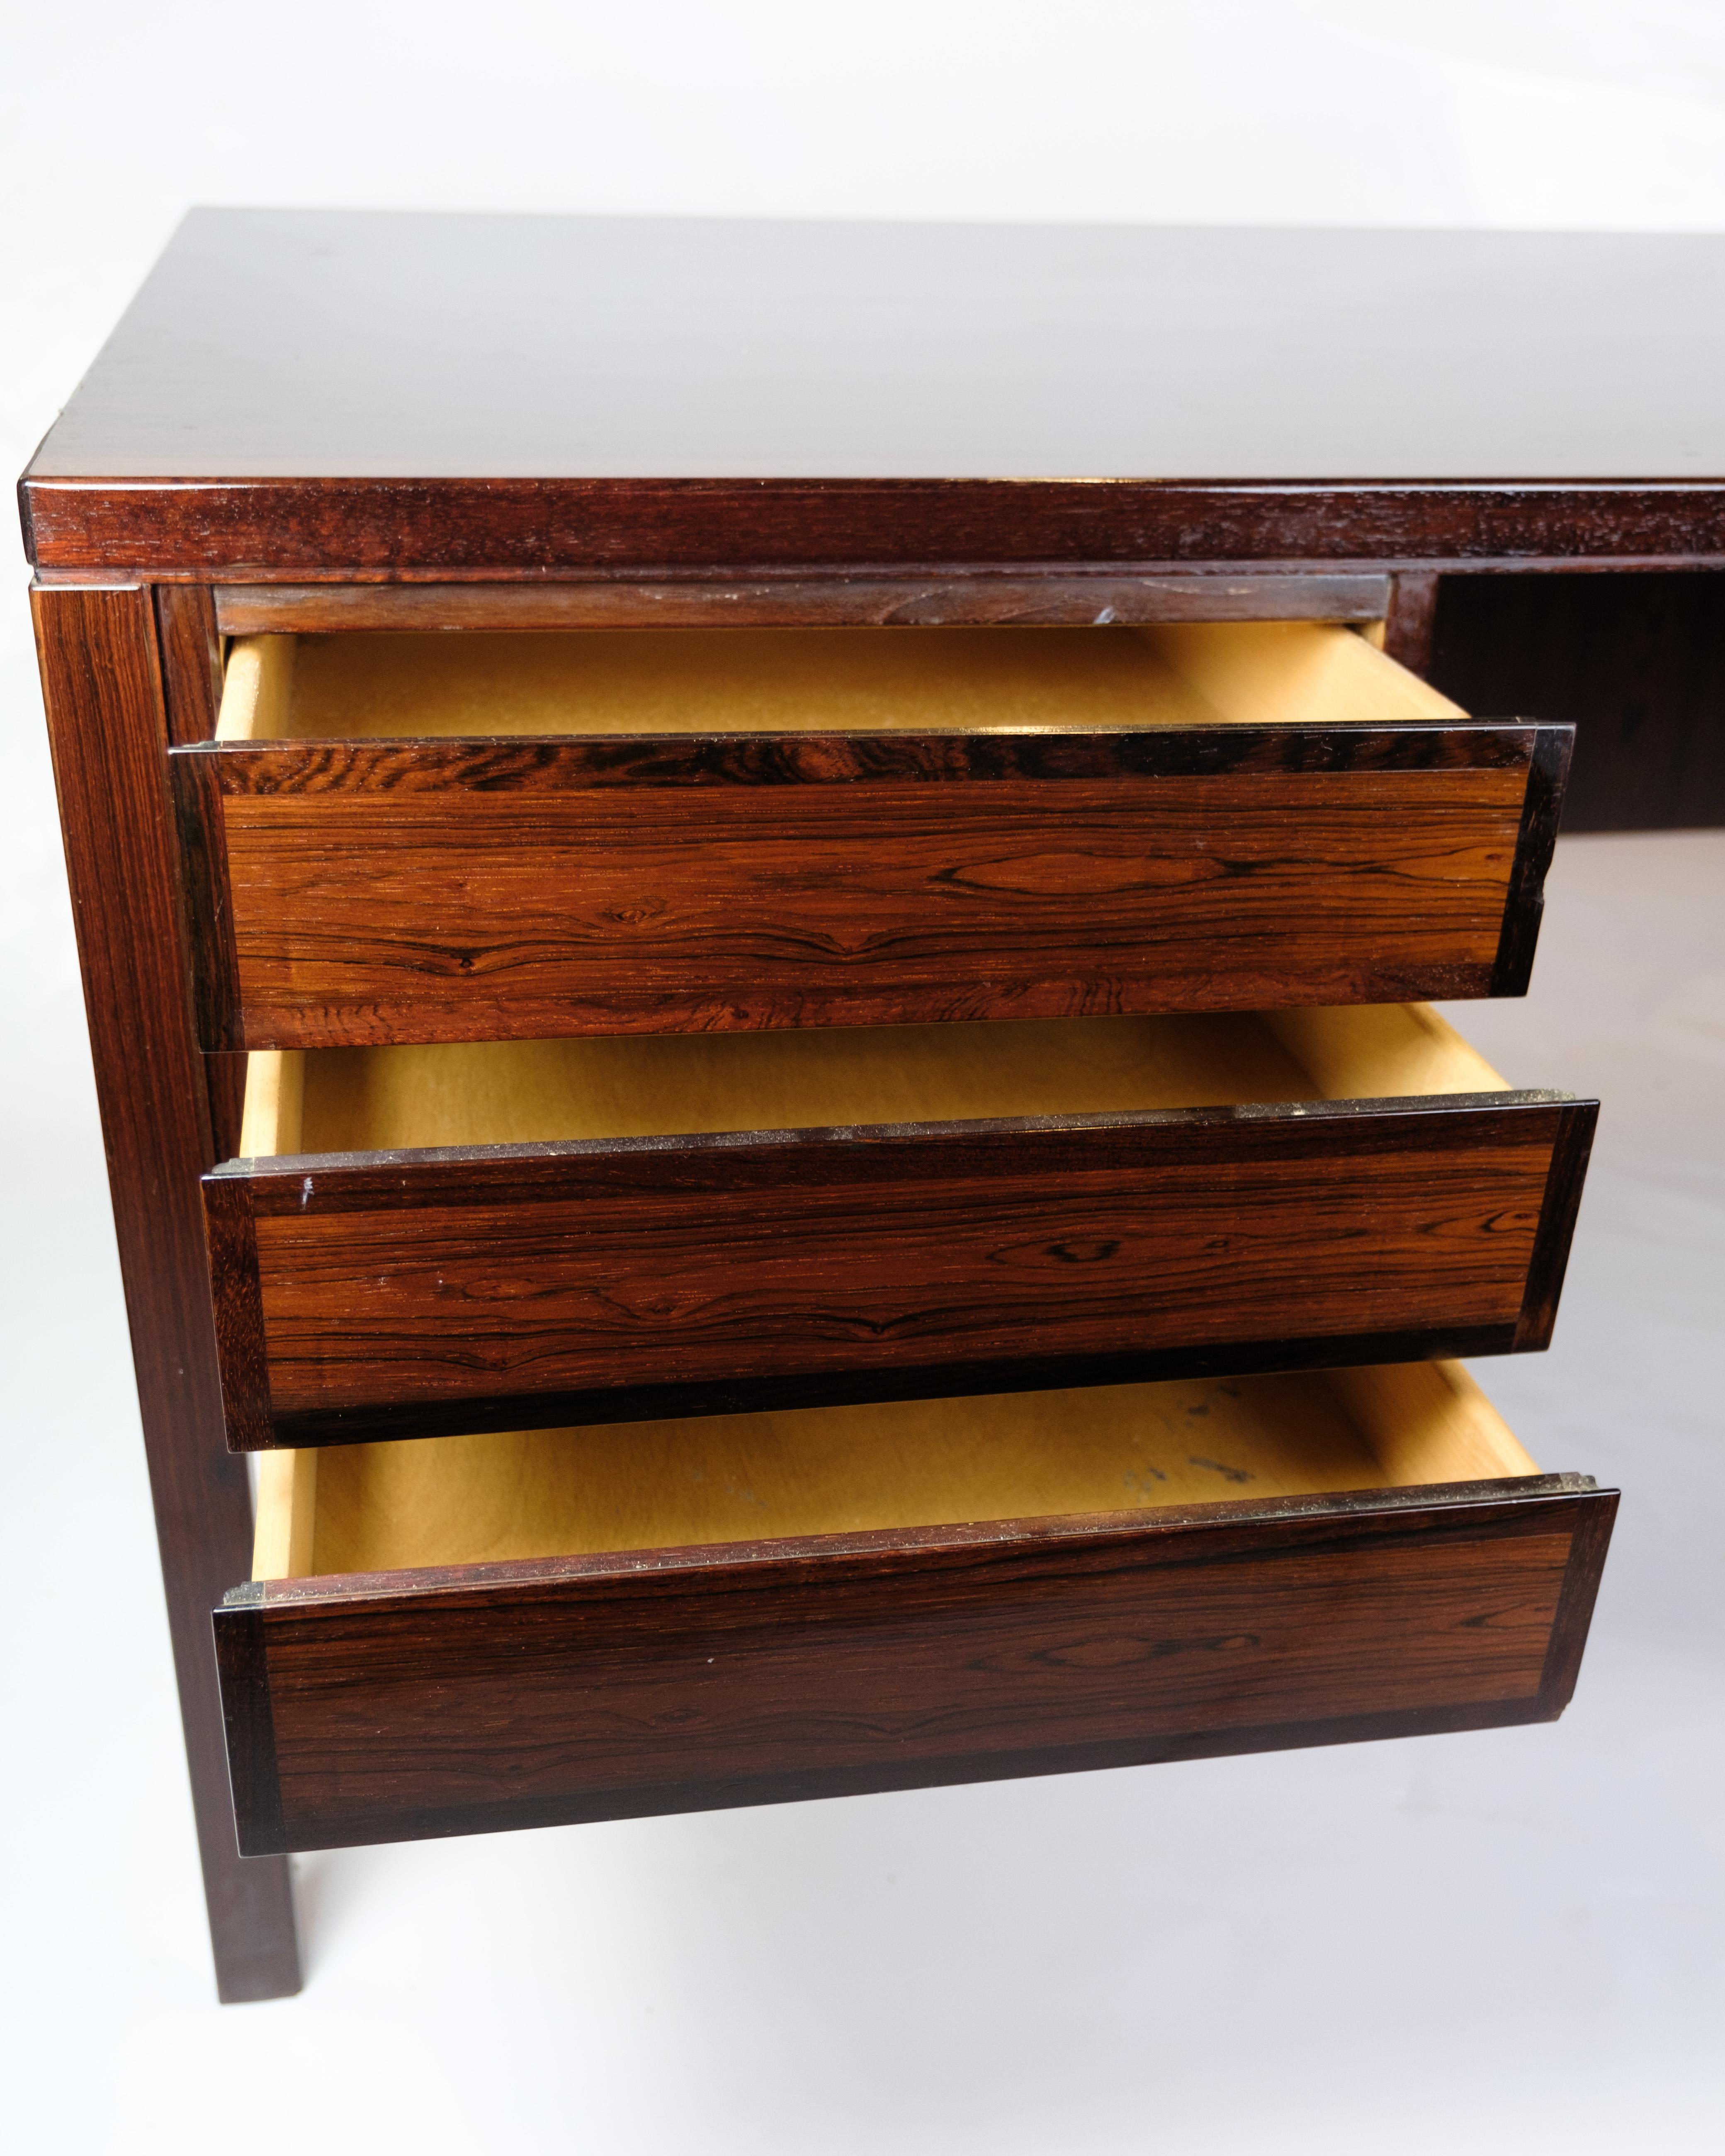 Mid-20th Century Desk Made In Rosewood By Omann Jun. Furniture Factory From 1960s For Sale